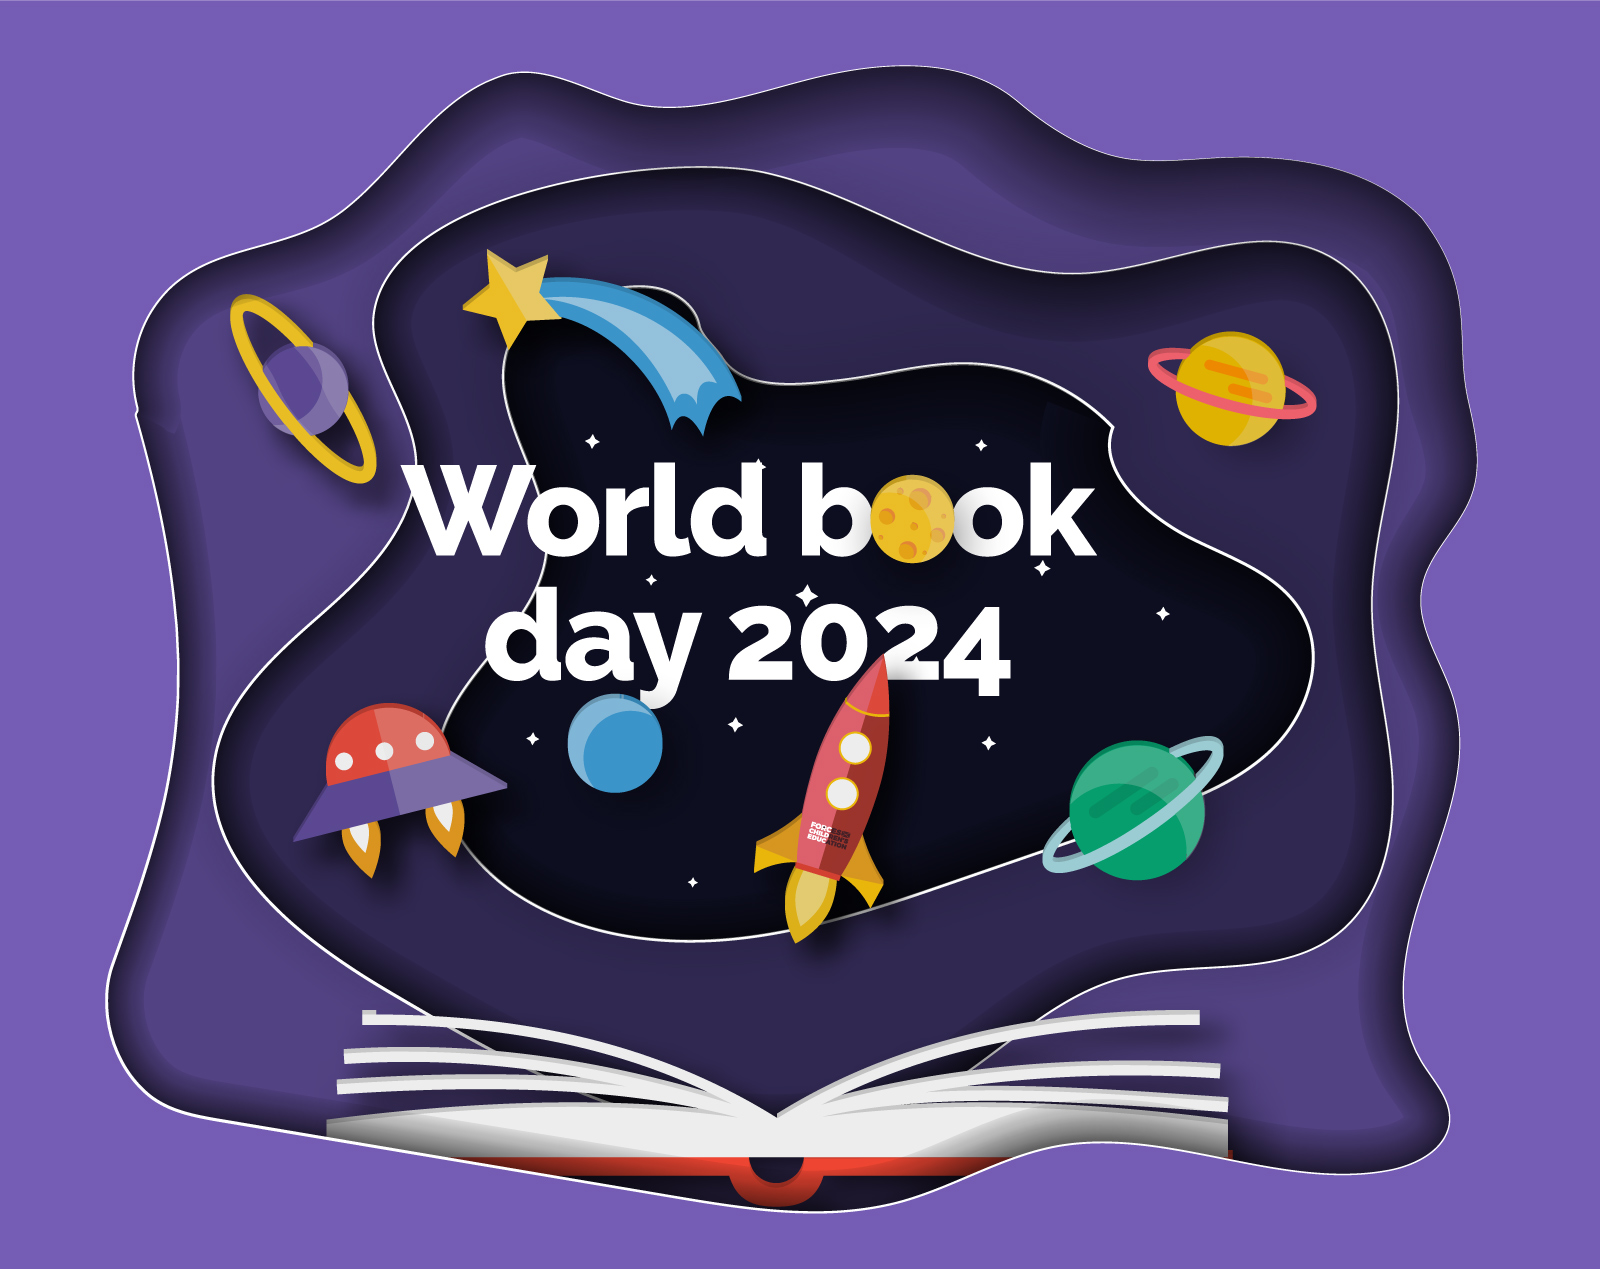 An illustration showing the universe with the words World Book Day 2024, coming out of an open book.